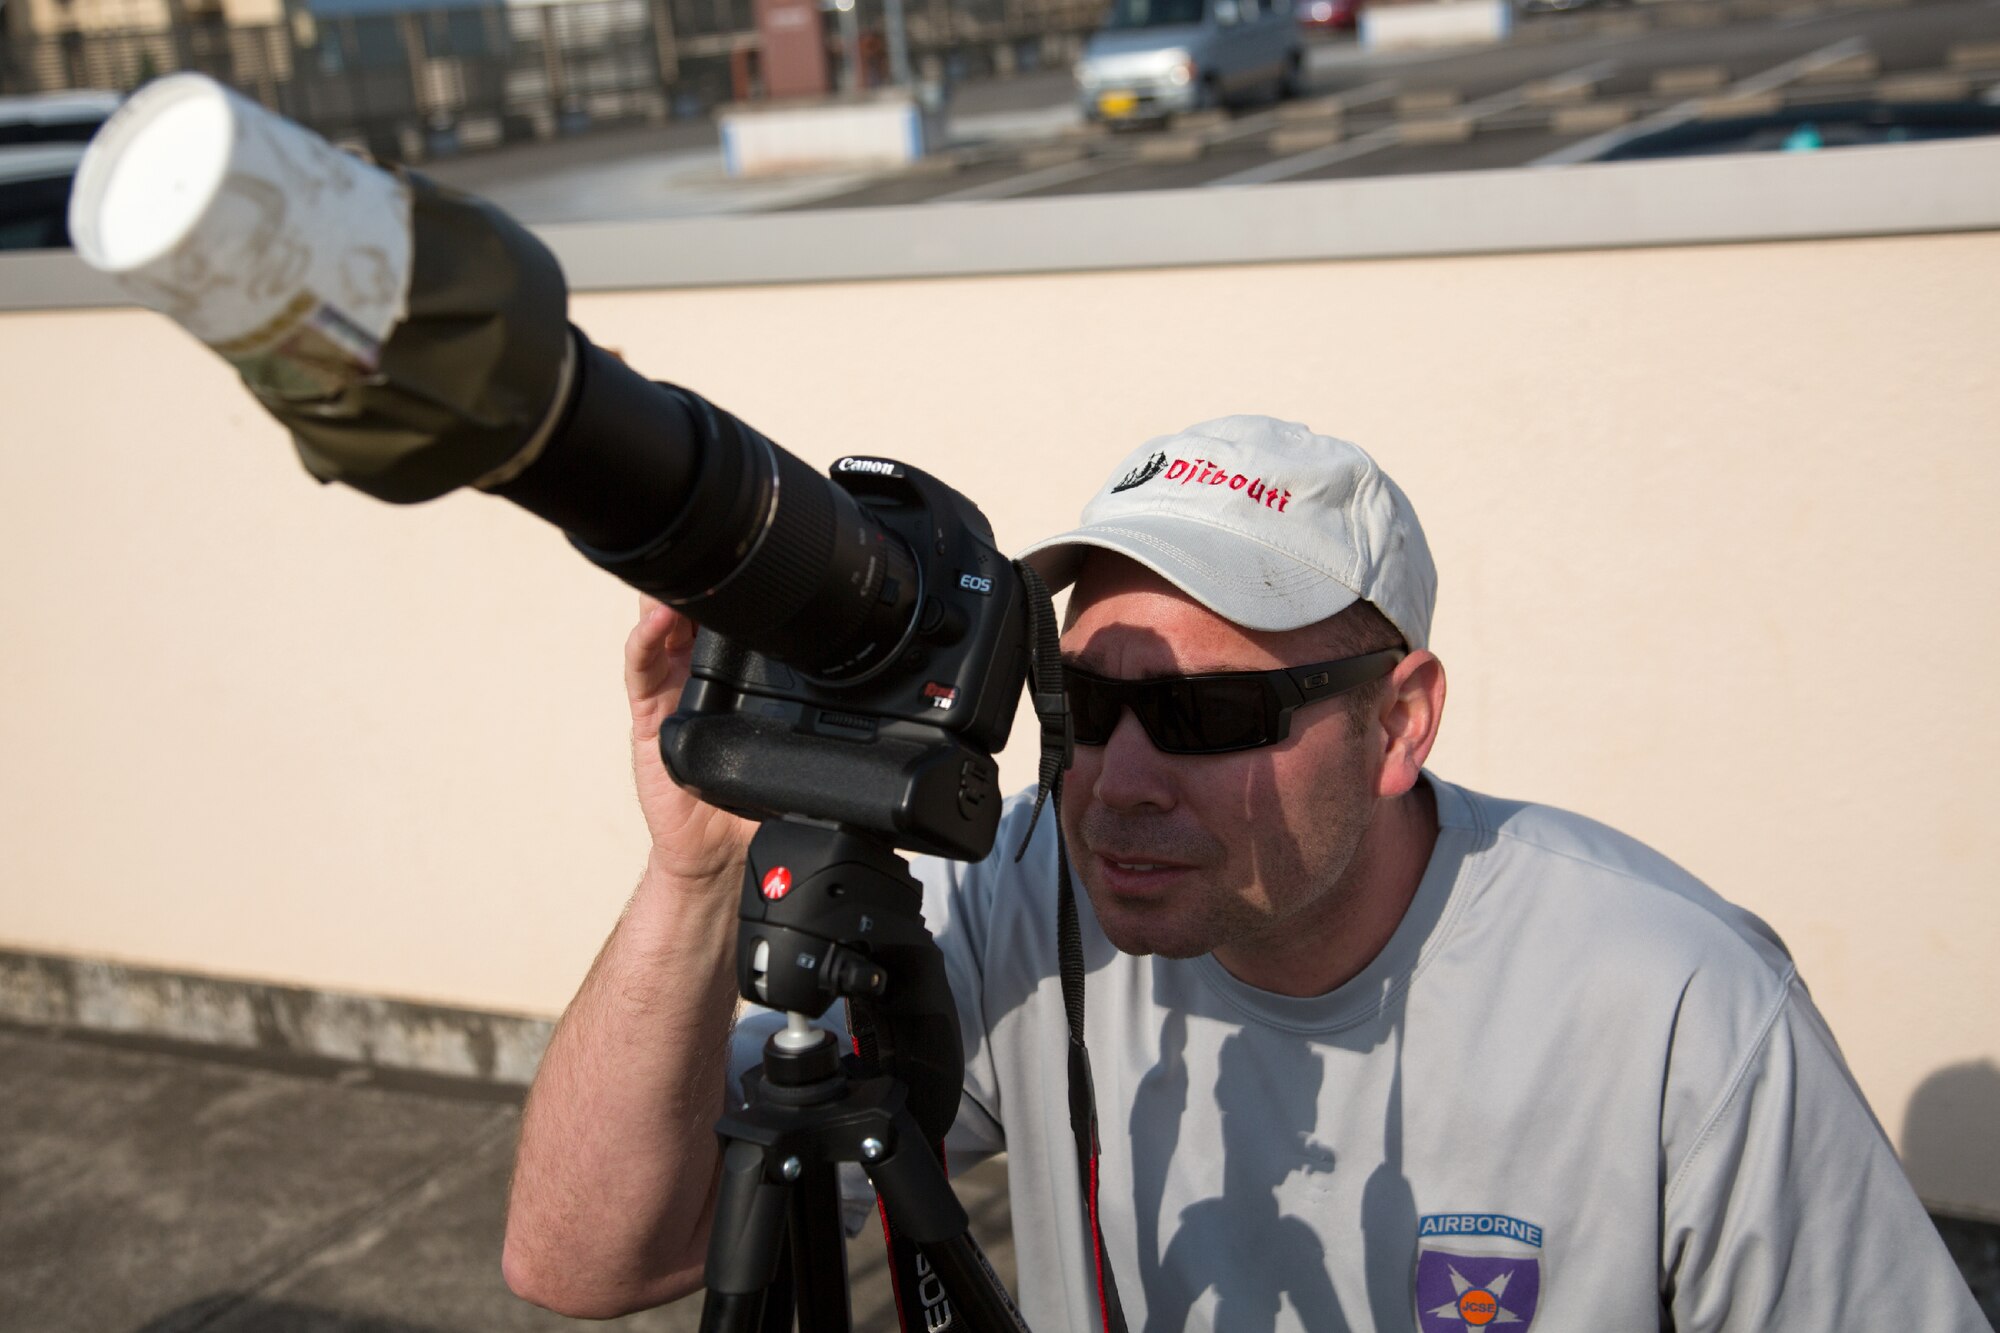 YOKOTA AIR BASE, Japan -- Master Sgt. Brian Mann, Defense Media Activity-Pacific, pacific theater maintenance superintendent, captures the annular solar eclipse with his custom-made pinhole filter at Yokota Air Base, Japan, May 21, 2012. The eclipse stretched from Southeast Asia across the Pacific Ocean to western parts of North America. (U.S. Air Force photo by Osakabe Yasuo)